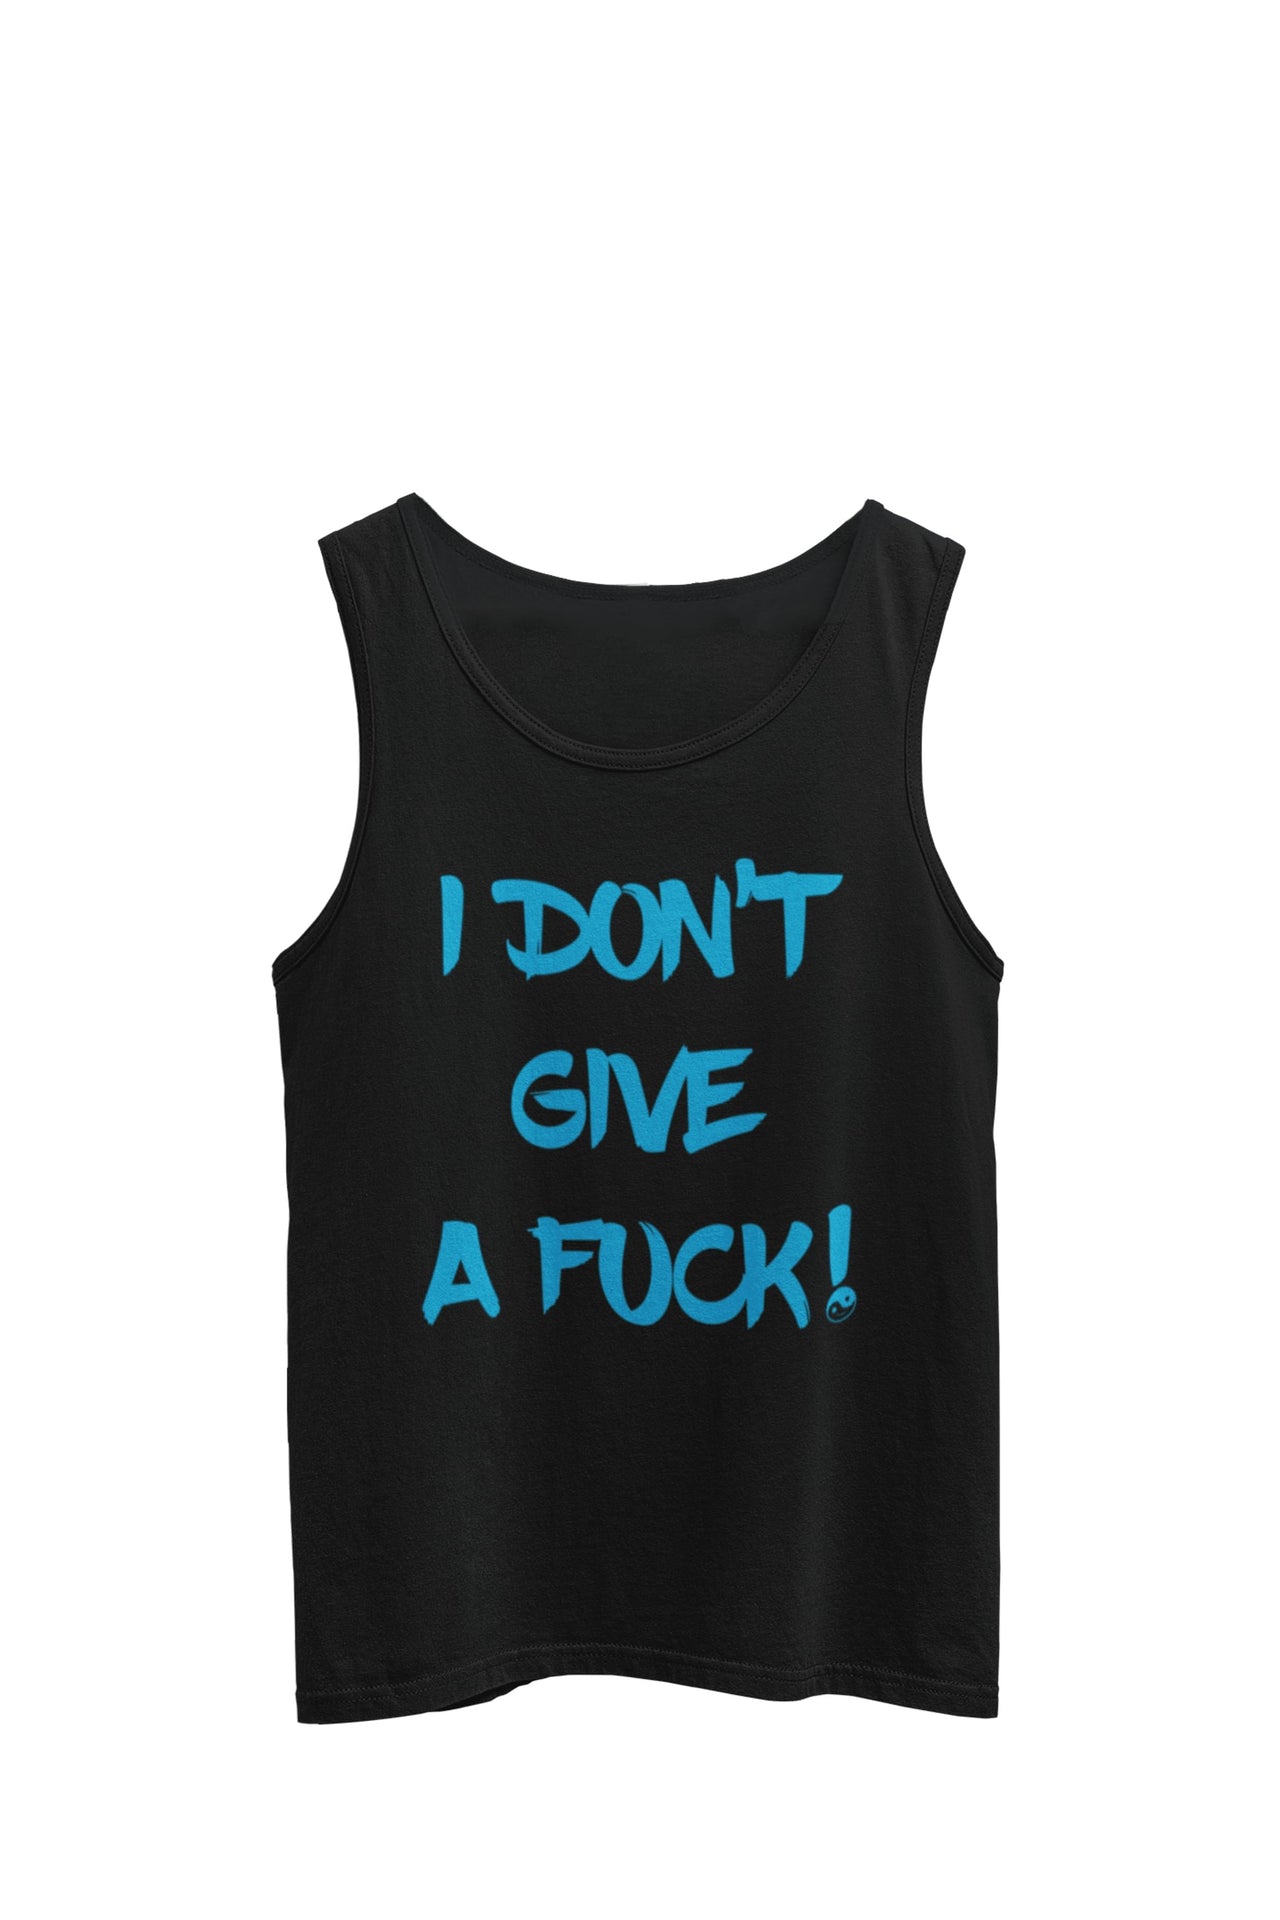 Navy Tank Top featuring the bold statement 'I don't give a fuck'. Designed by WooHoo Apparel